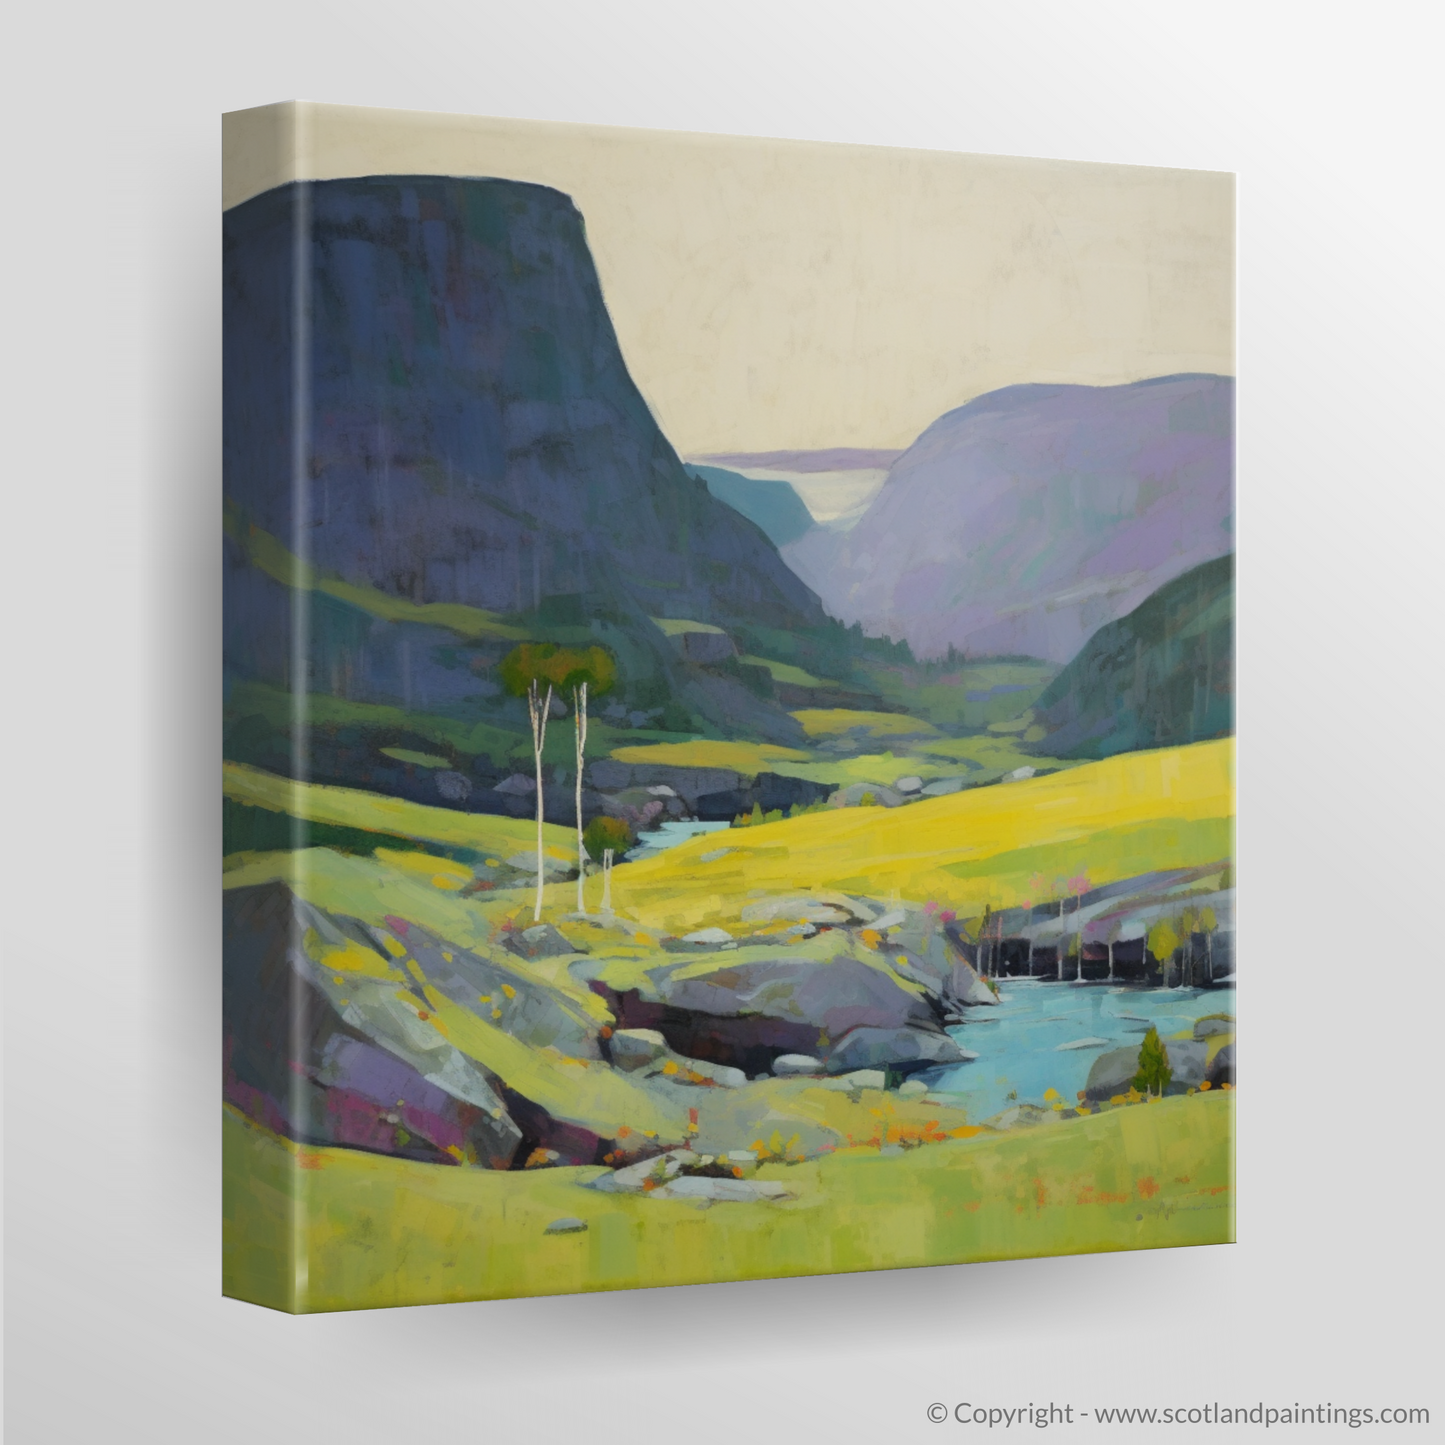 Abstract Elegance of Glencoe: Lady's-mantle and Waterfall Whispers